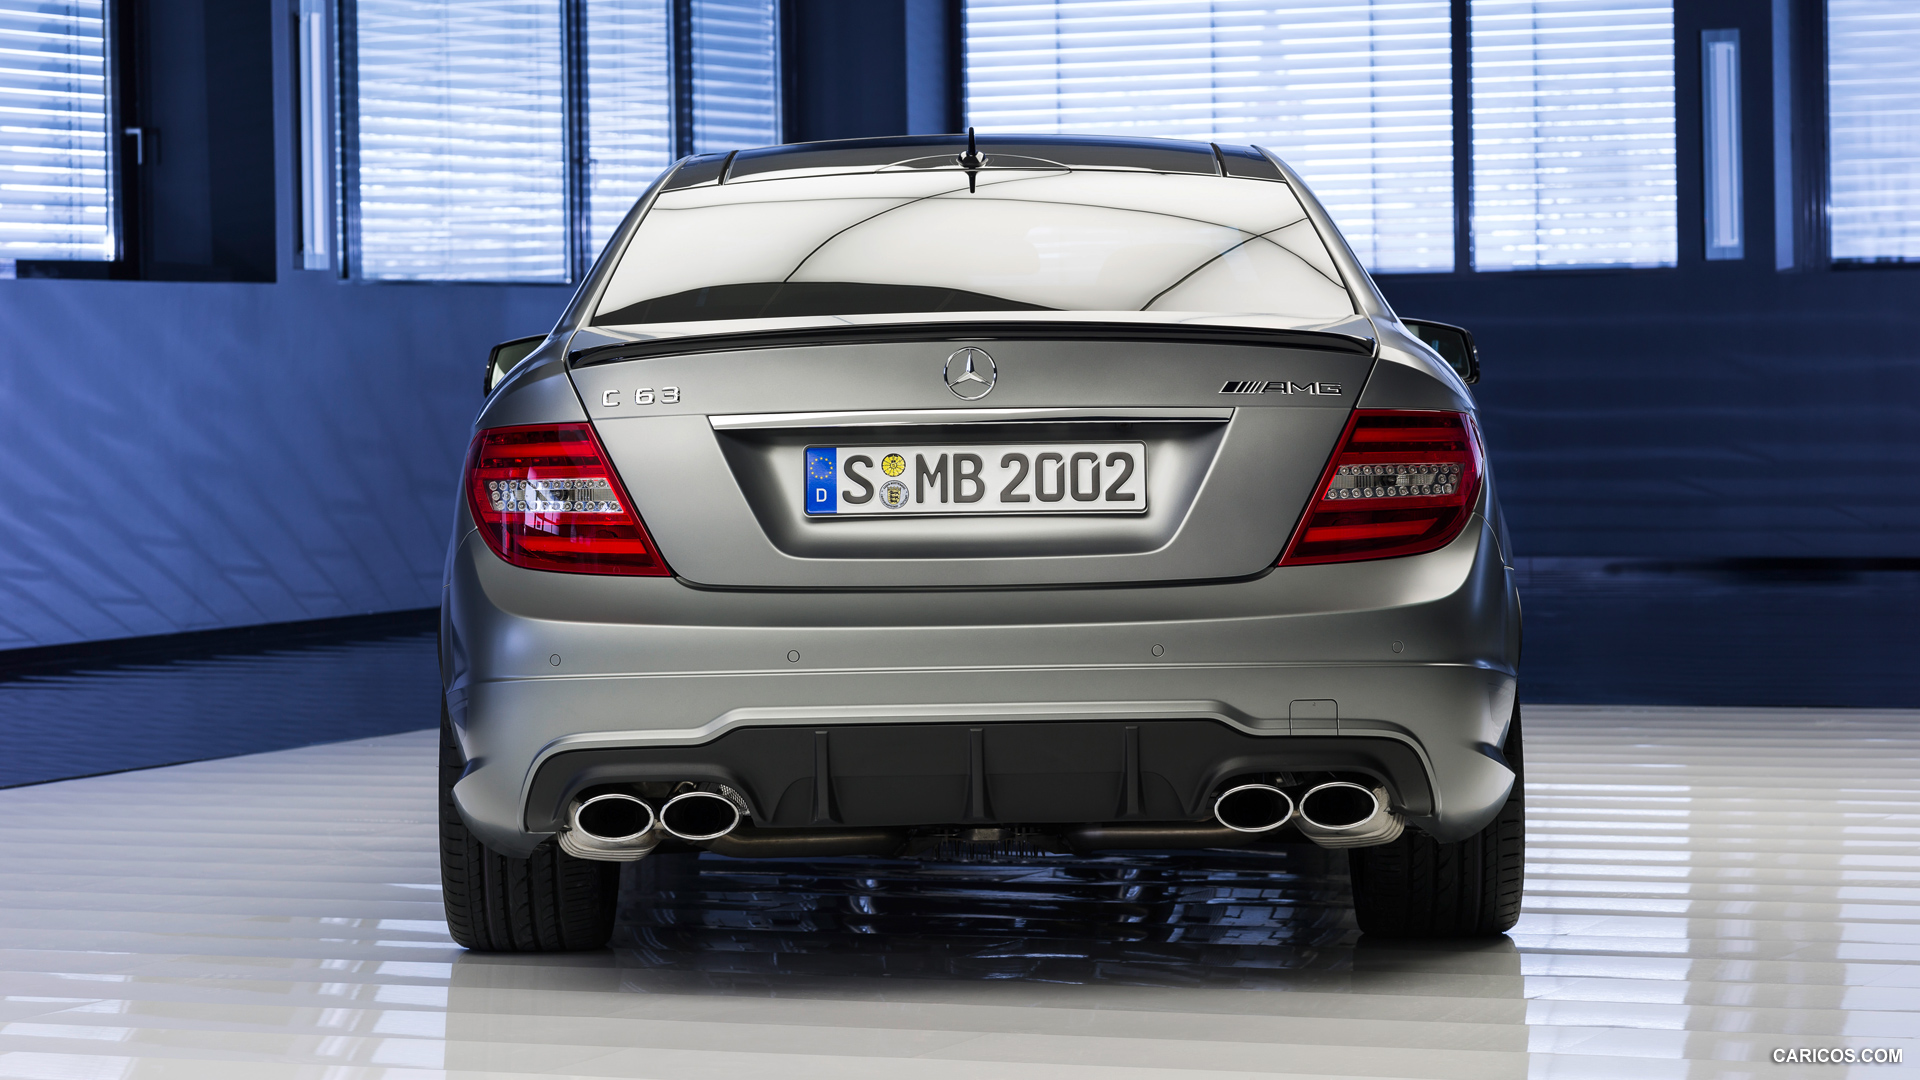 Mercedes-Benz C 63 AMG Coupe "Edition 507" (2013)  - Rear, #5 of 21